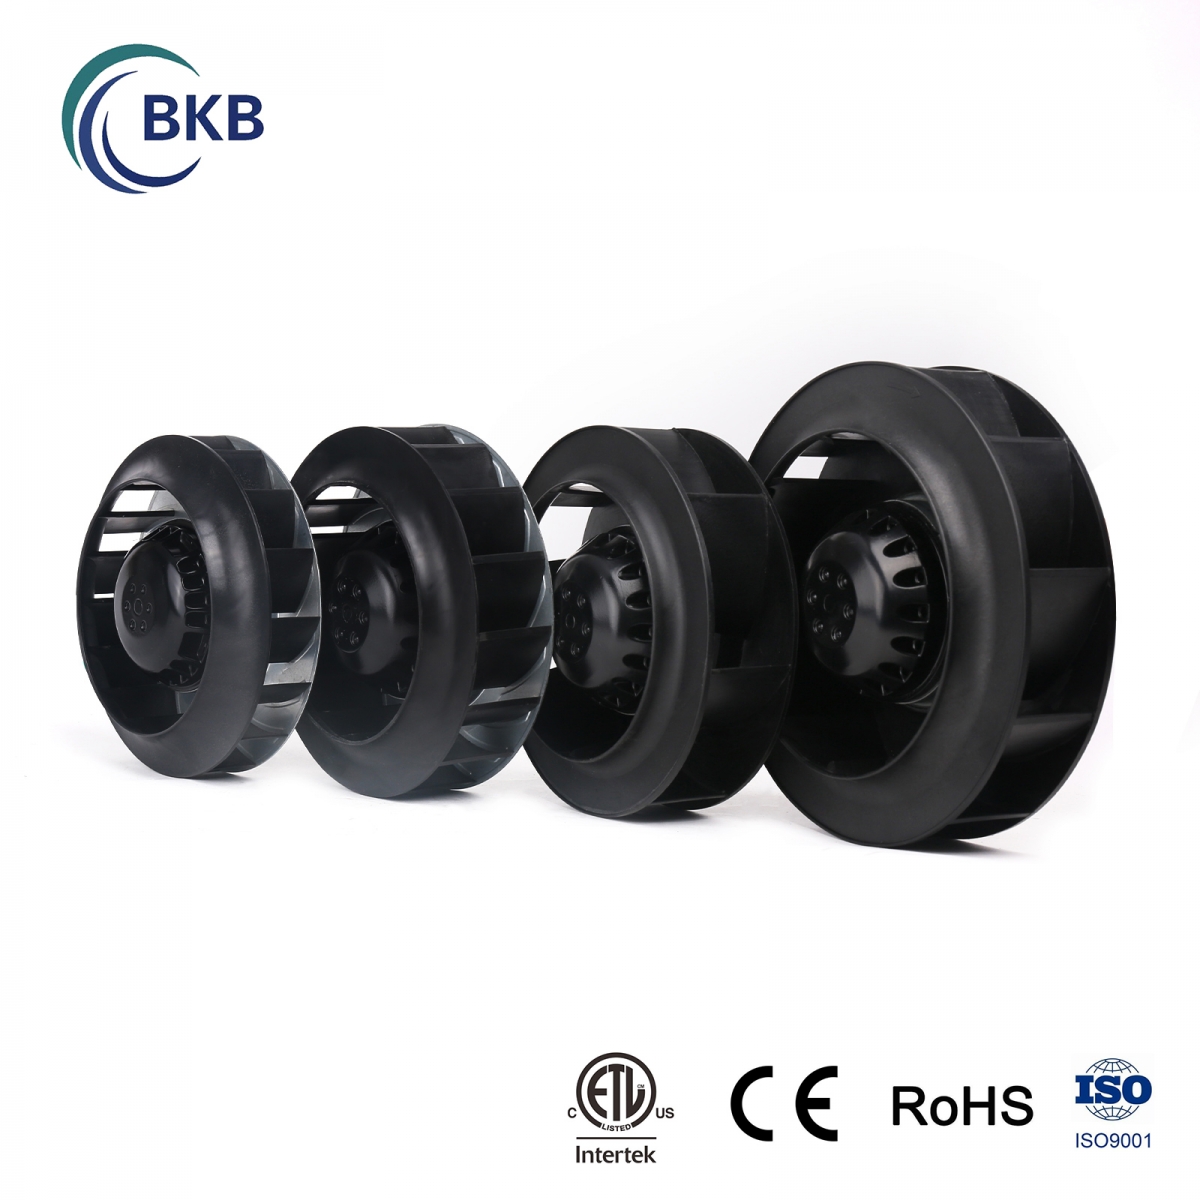 Centrifugal fans usually include a duct housing to direct the discharged air in a specific direction or through the radiator-SUNLIGHT BLOWER,Centrifugal Fans, Inline Fans,Motors,Backward curved centrifugal fans ,Forward curved centrifugal fans ,inlet fans, EC fans